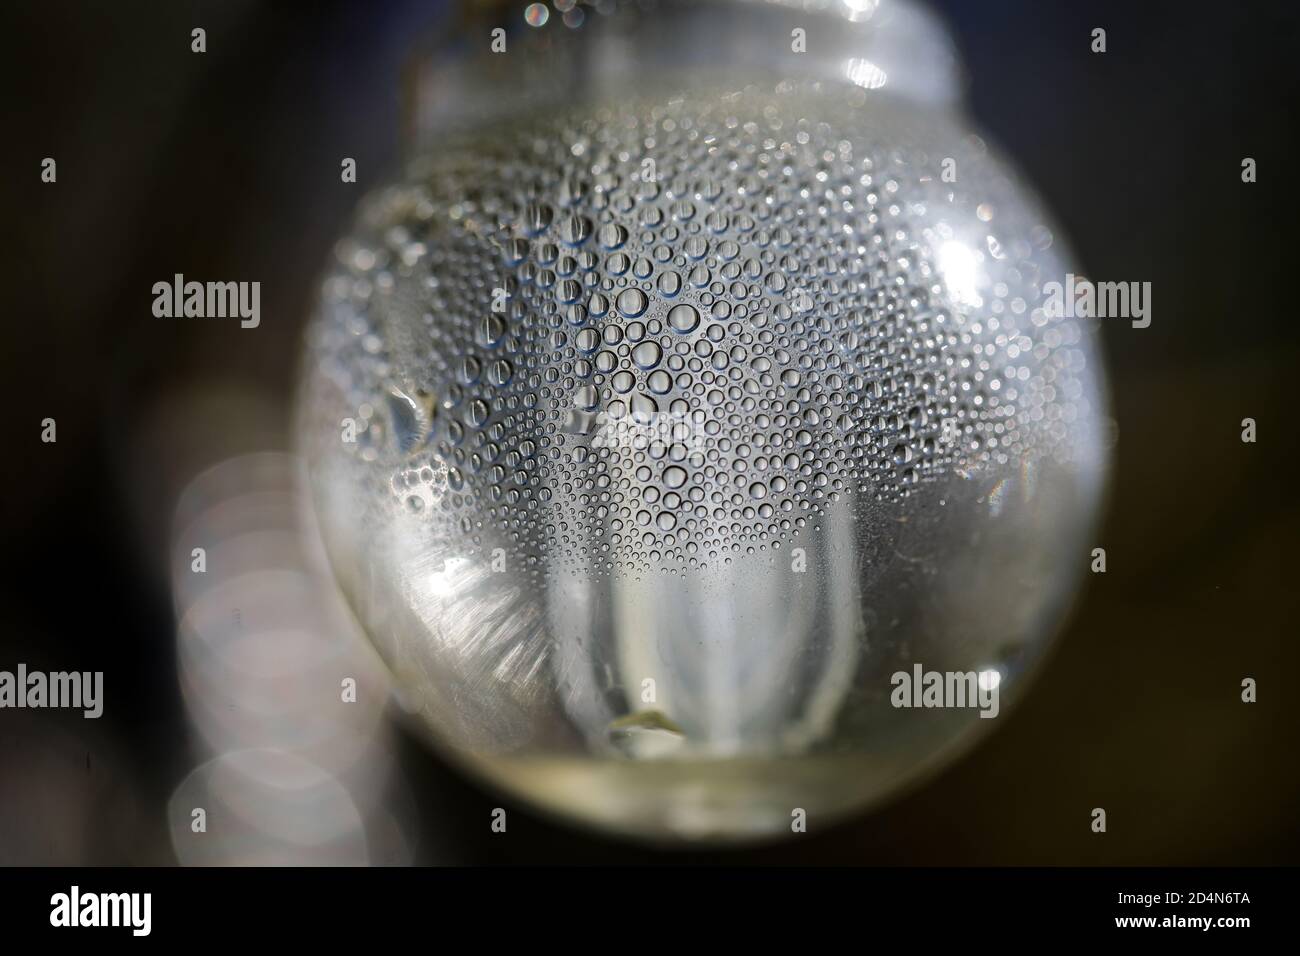 Details with drops of condensation water inside a solar light bulb Stock Photo